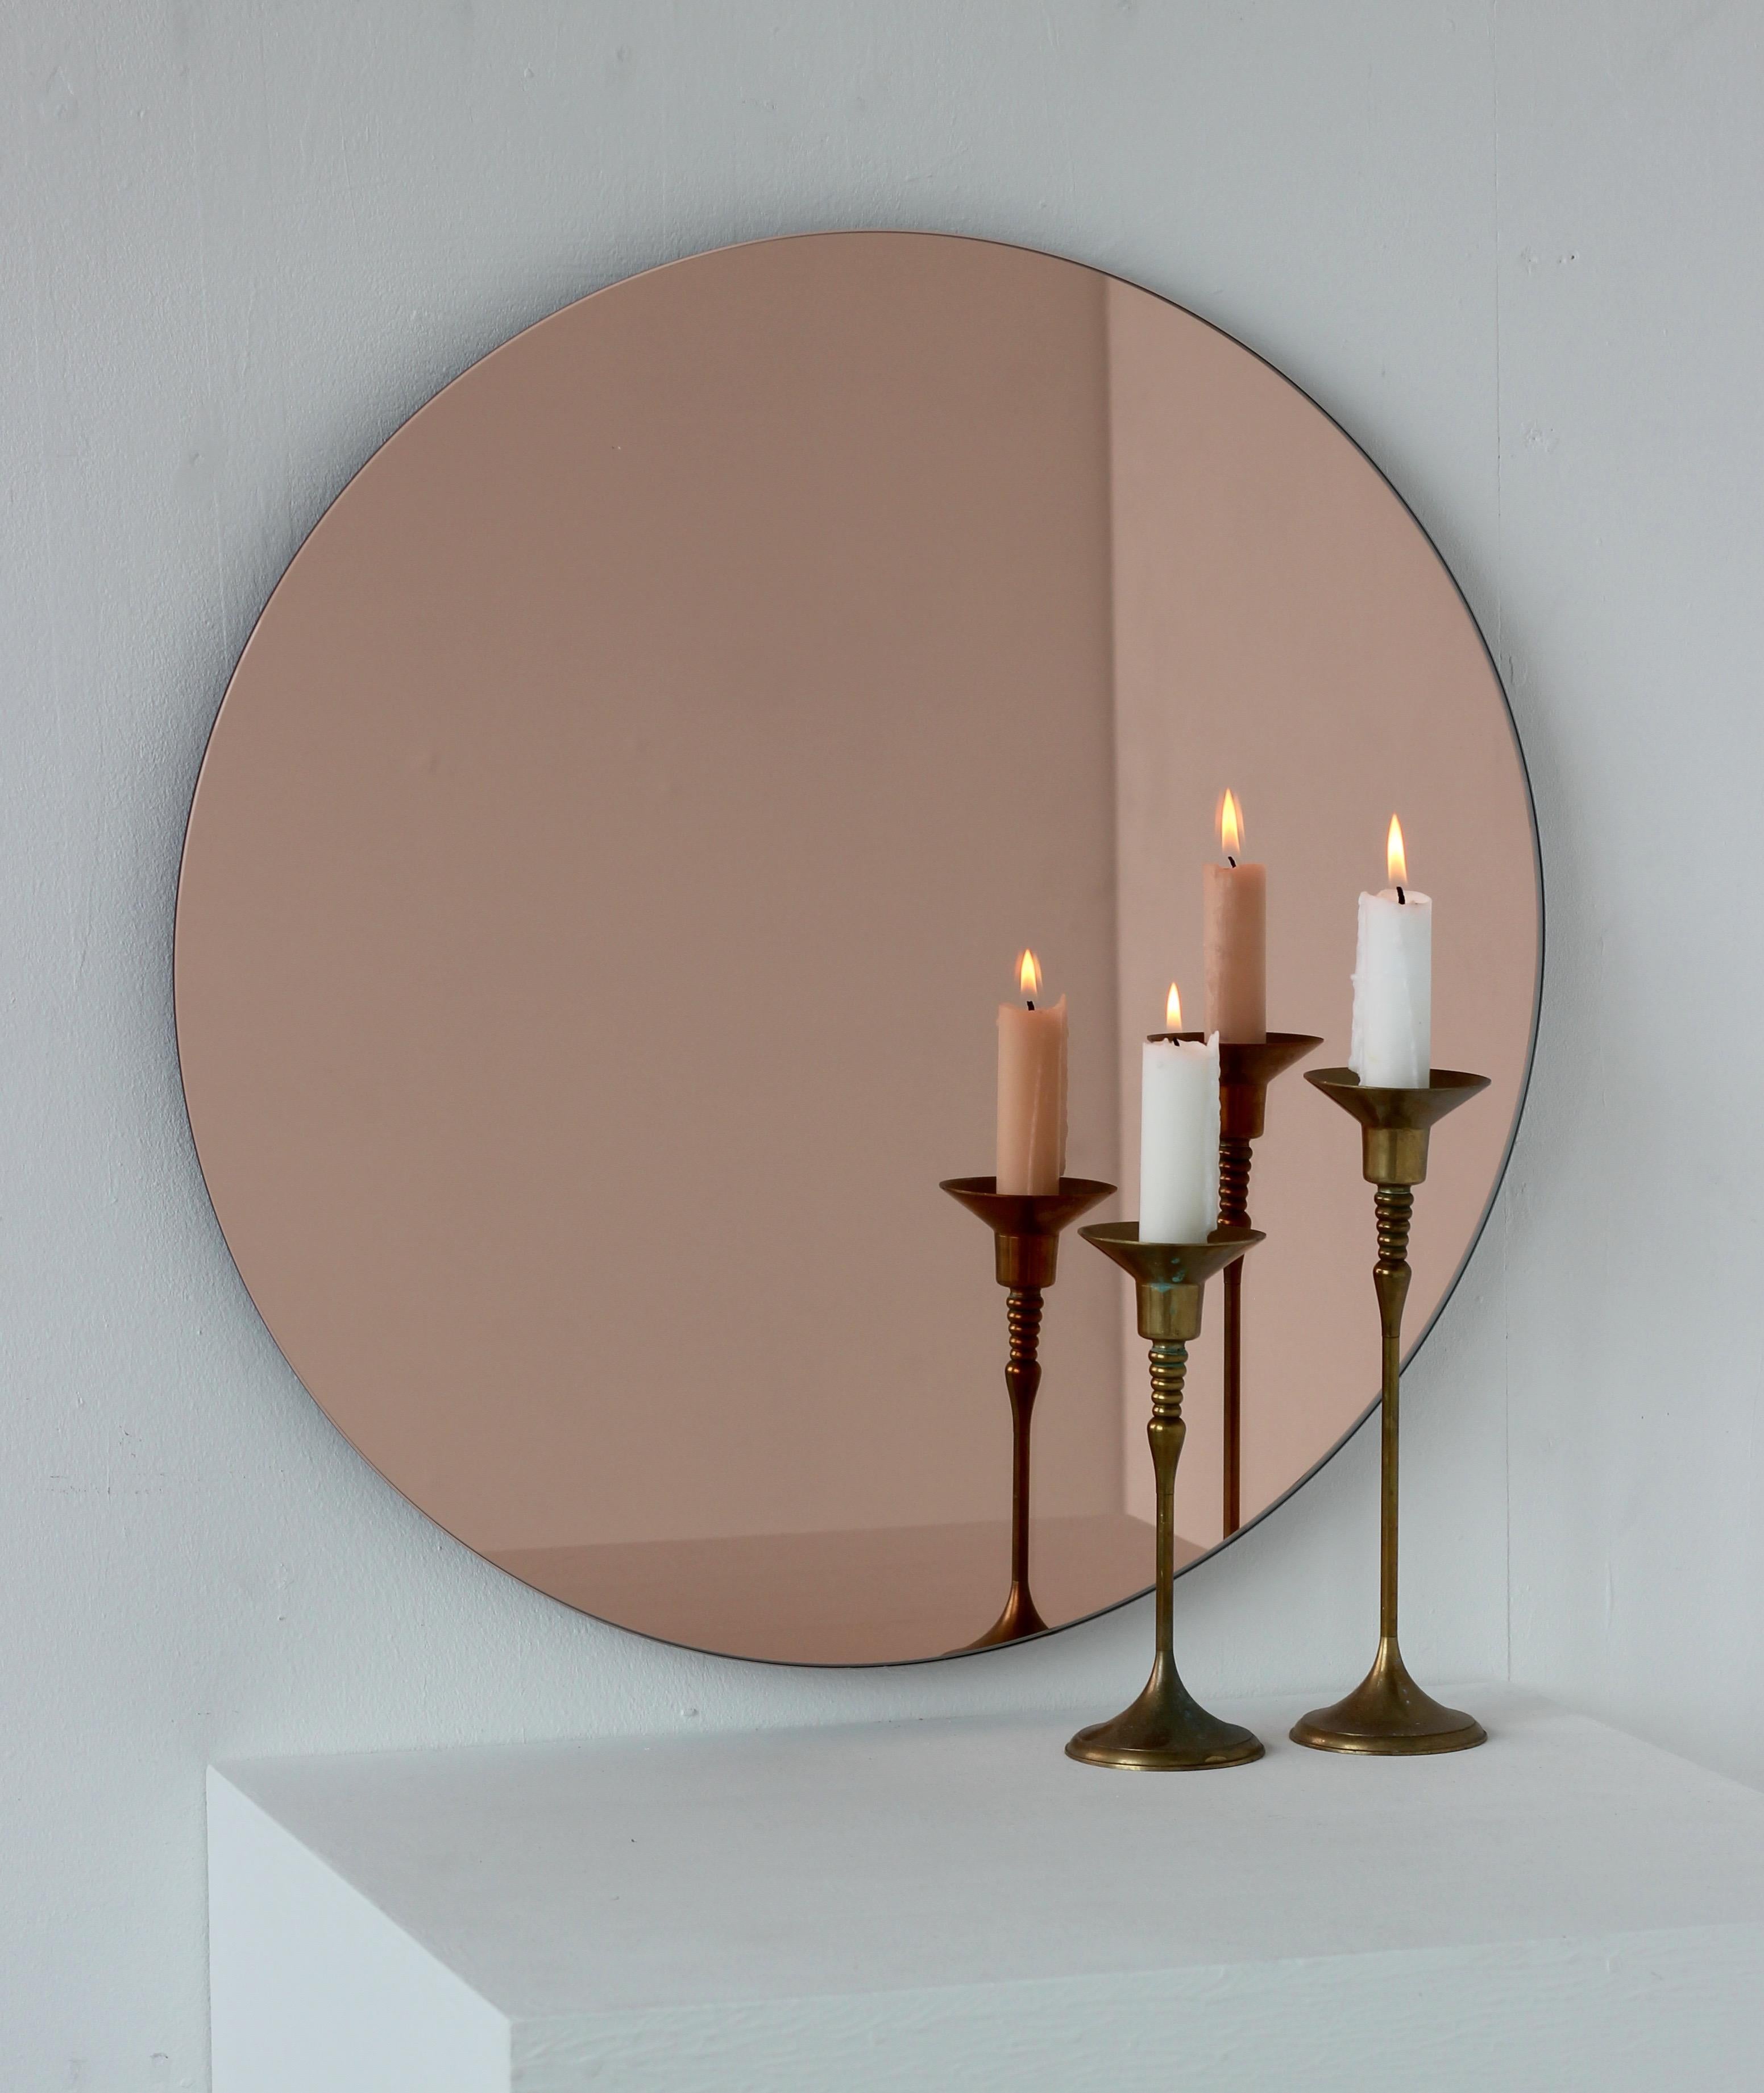 Orbis Rose Gold / Peach Tinted Round Contemporary Frameless Mirror, Medium In New Condition For Sale In London, GB